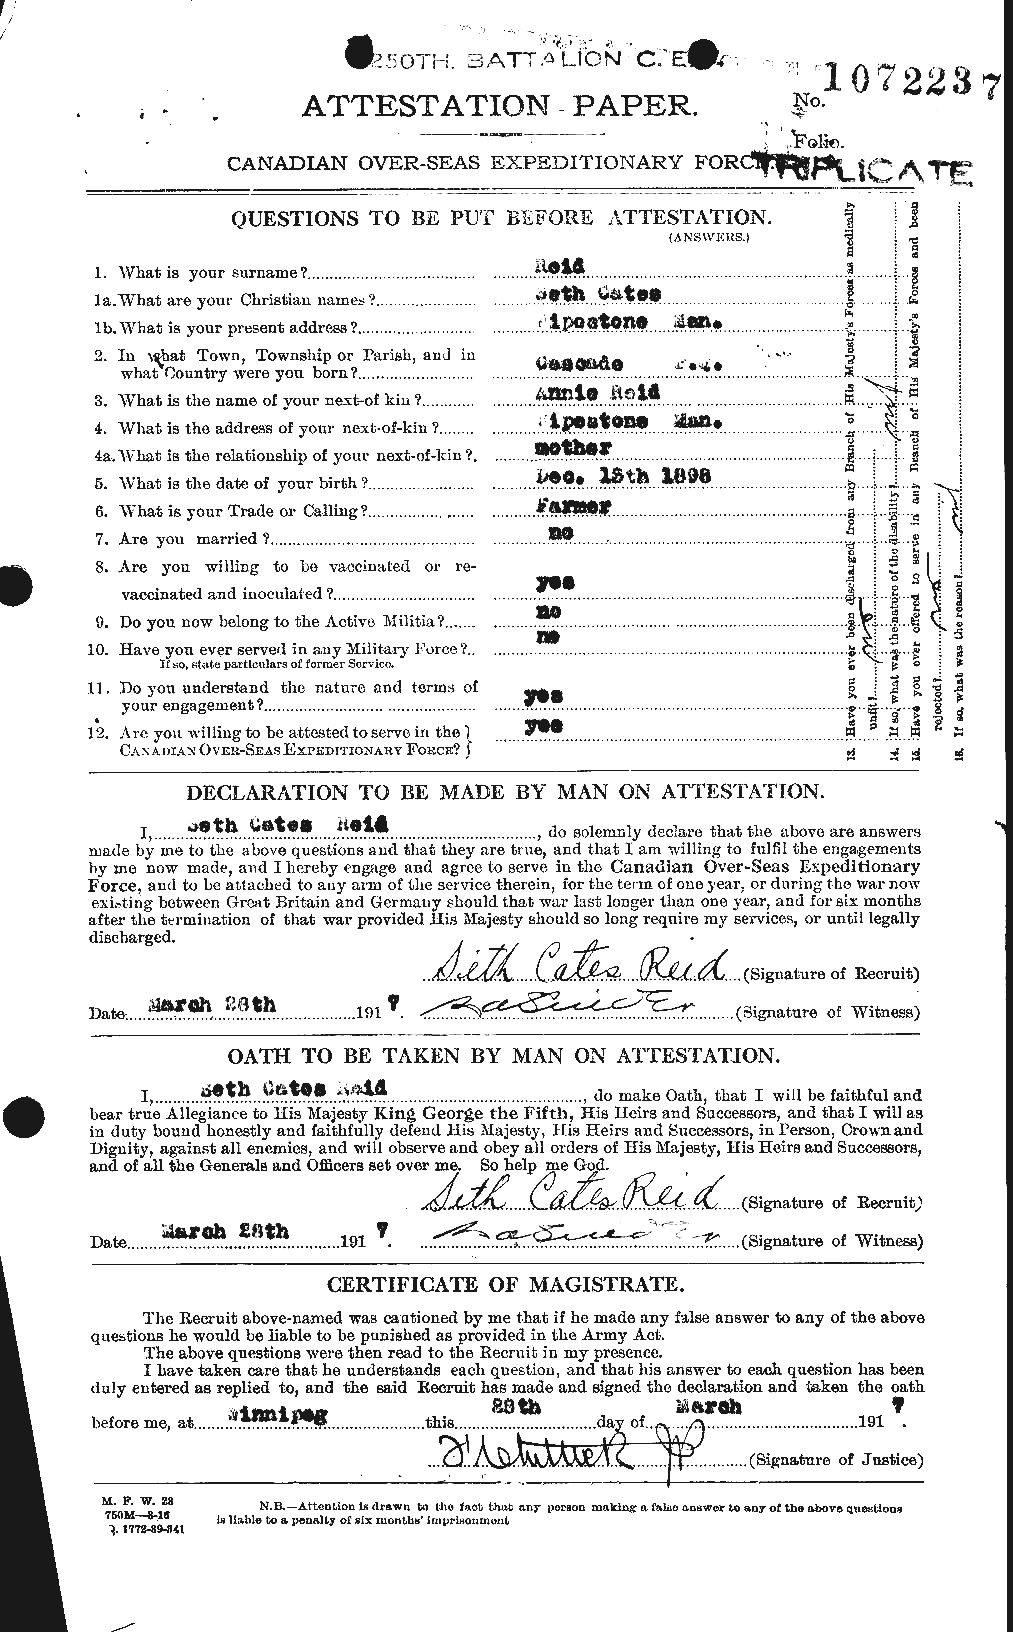 Personnel Records of the First World War - CEF 601957a